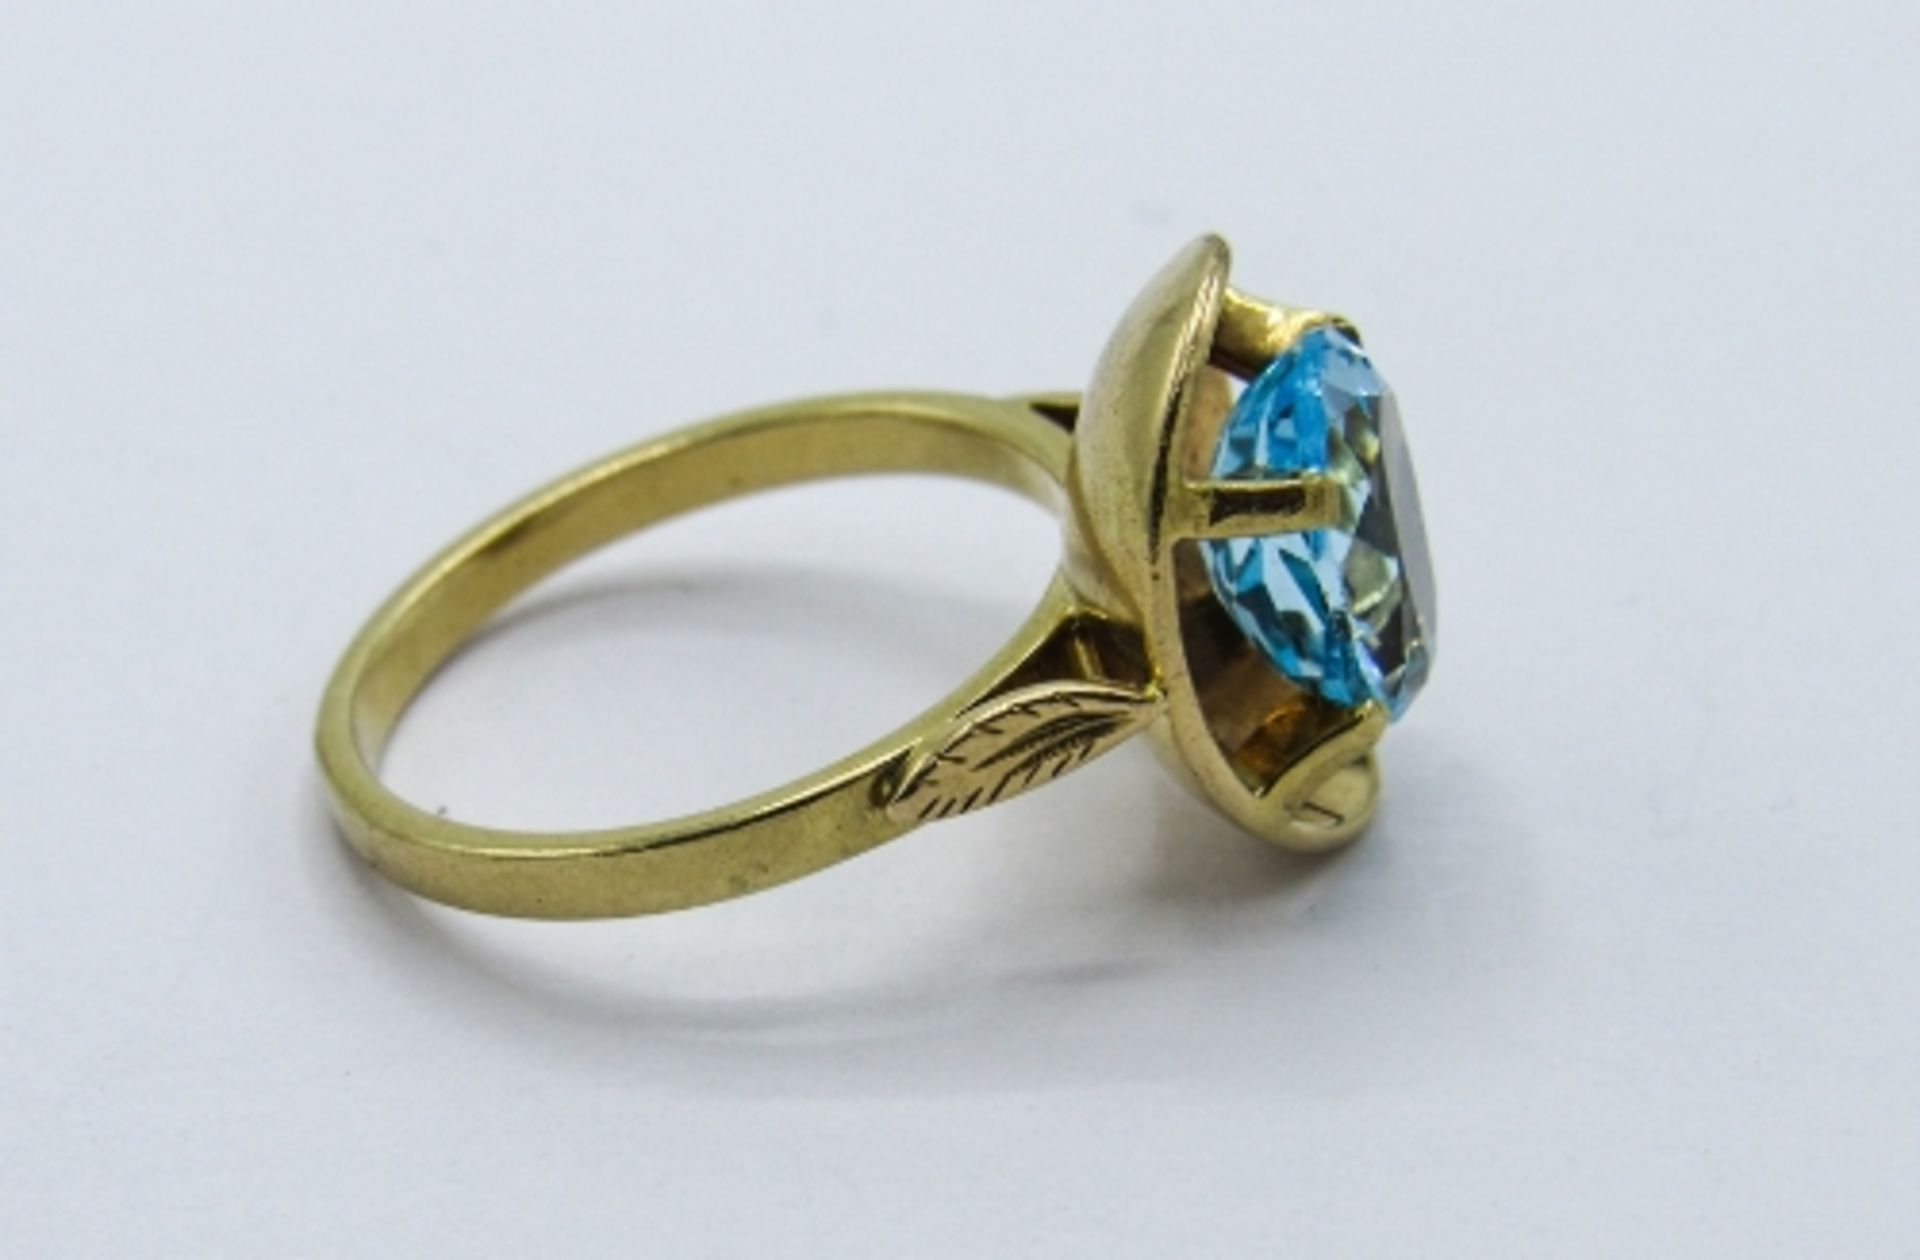 9ct gold topaz ring, weight 4.8gms, size Q. Estimate £150-170 - Image 3 of 4